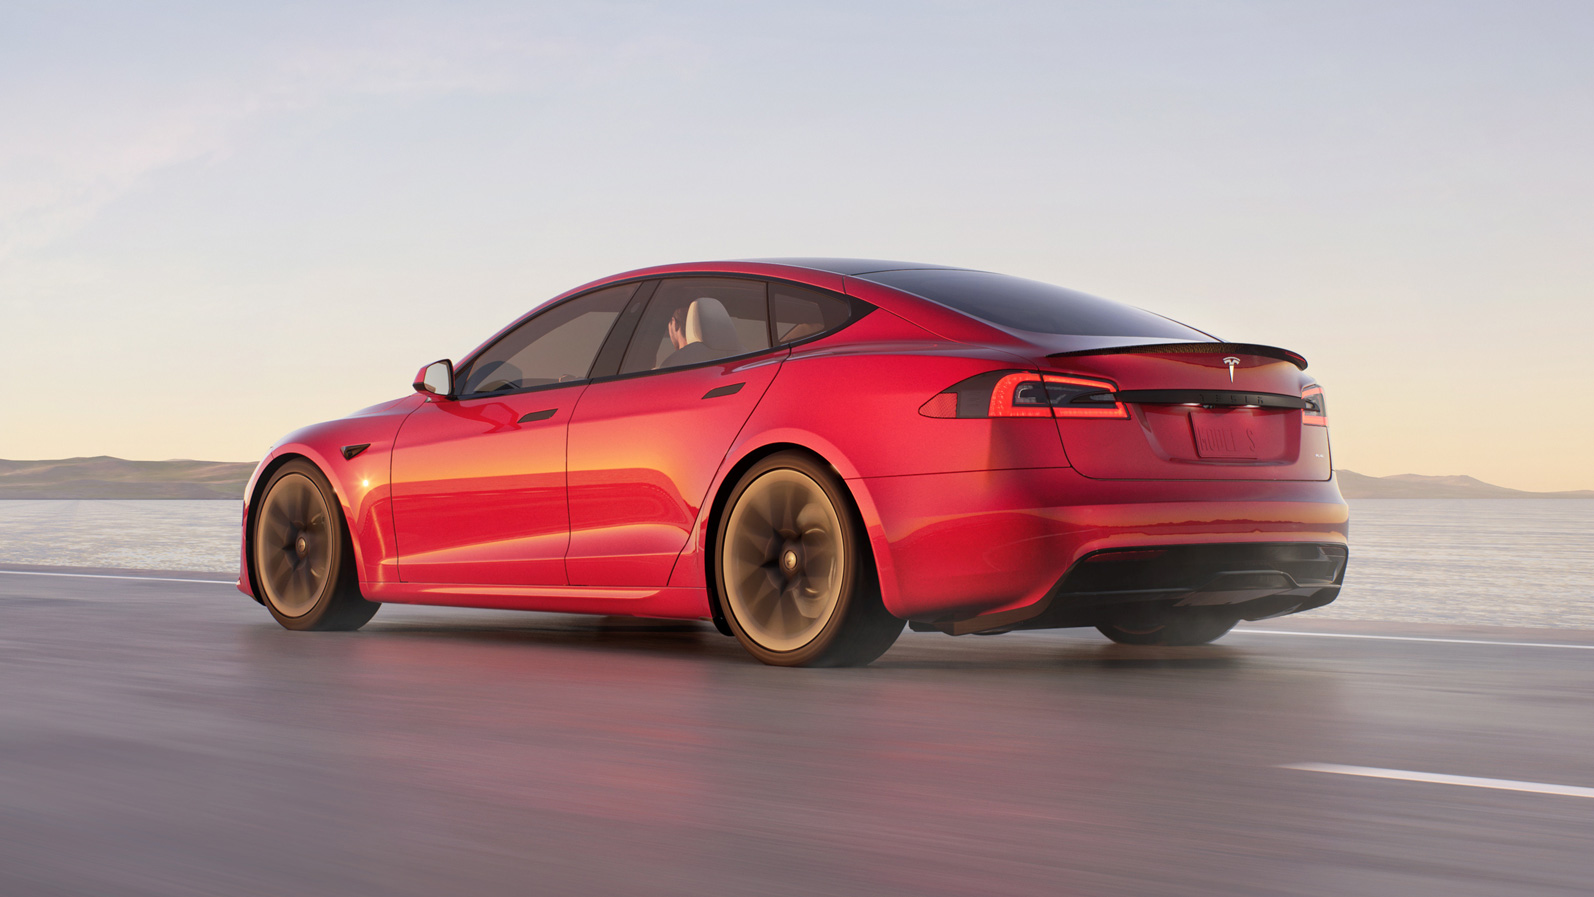 What technological advancements set Tesla apart from other car manufacturers?